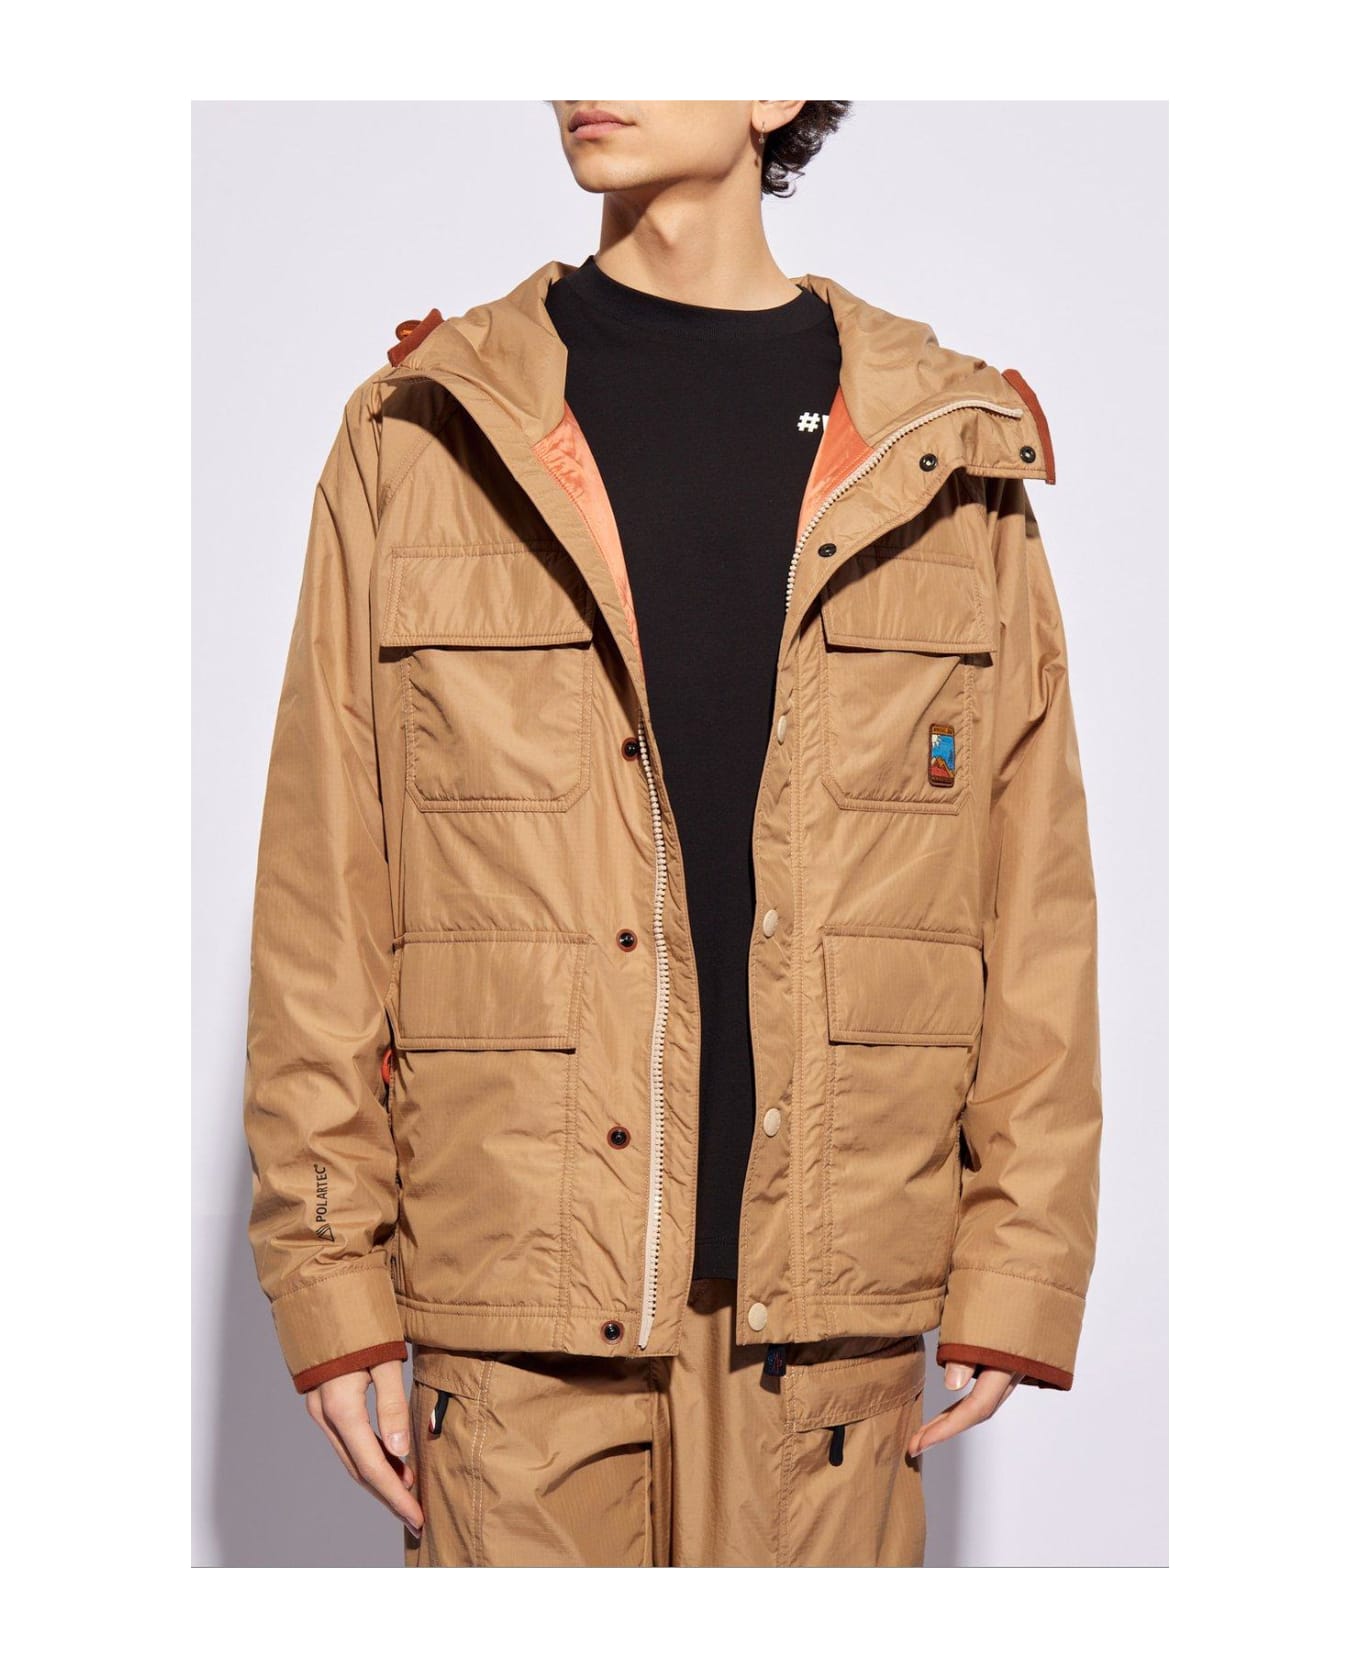 Moncler Rutor Logo Patch Hooded Jacket